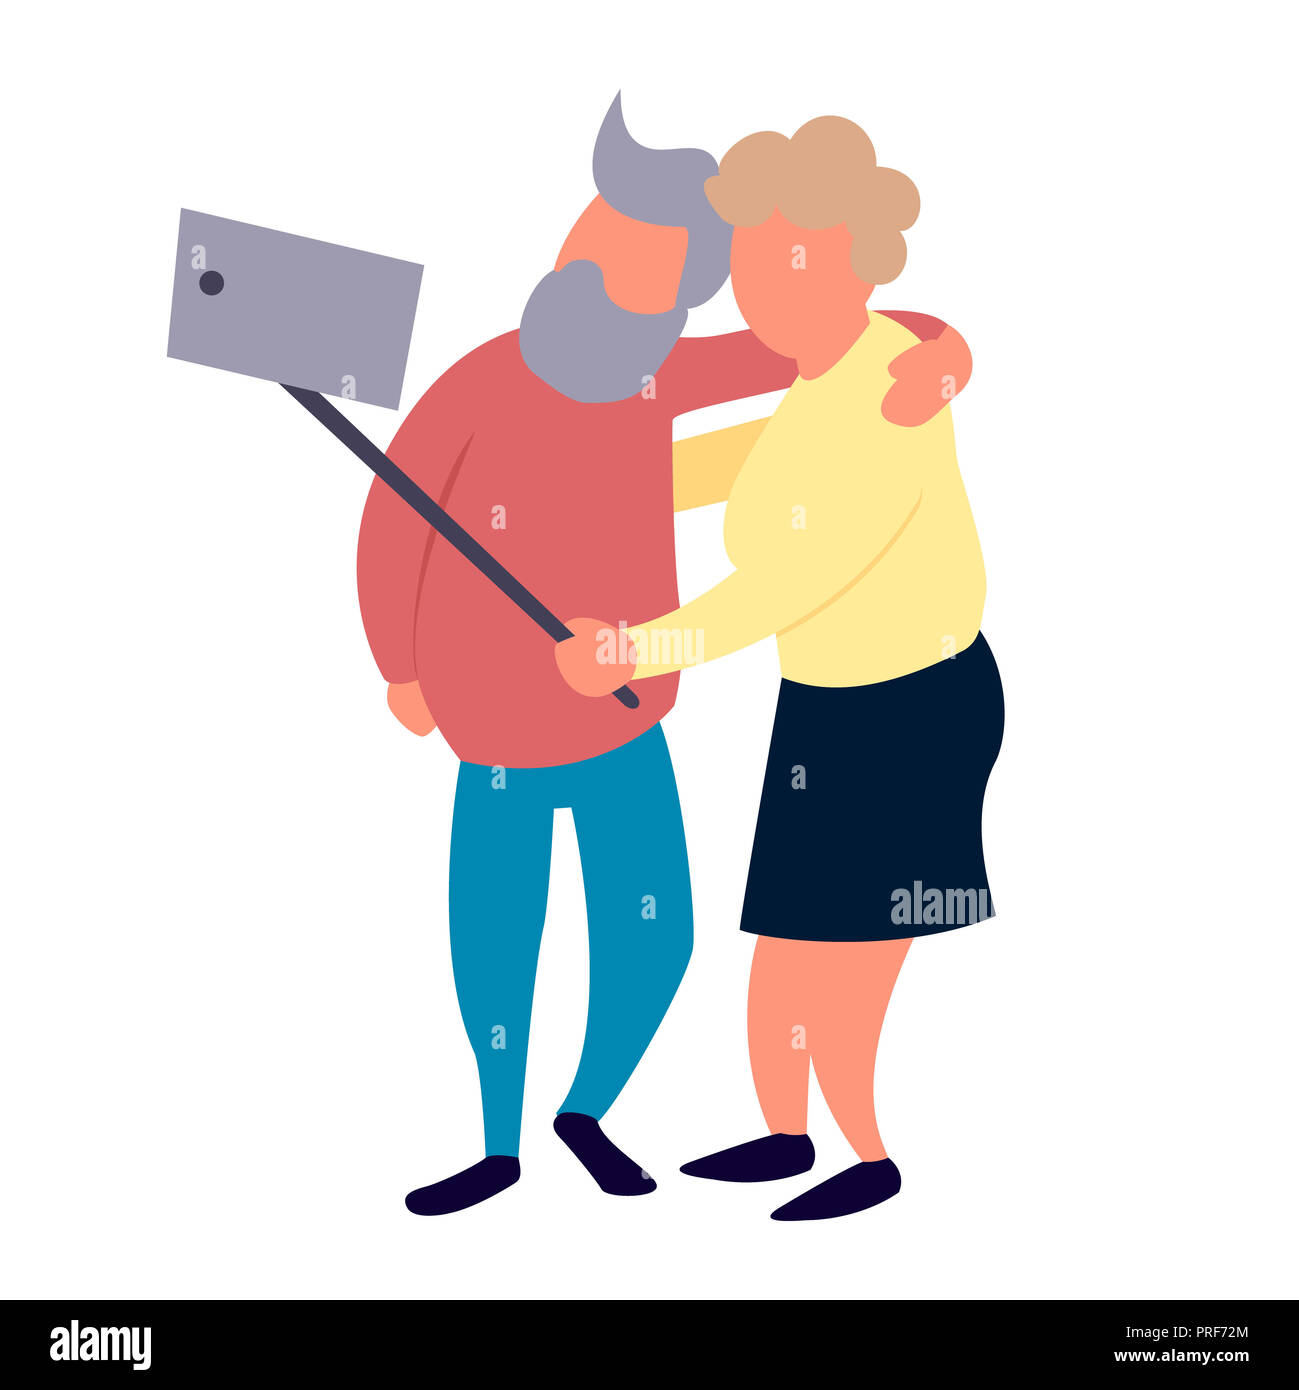 Old people couple make selfie. Recreation and leisure senior activities concept. Stock Photo